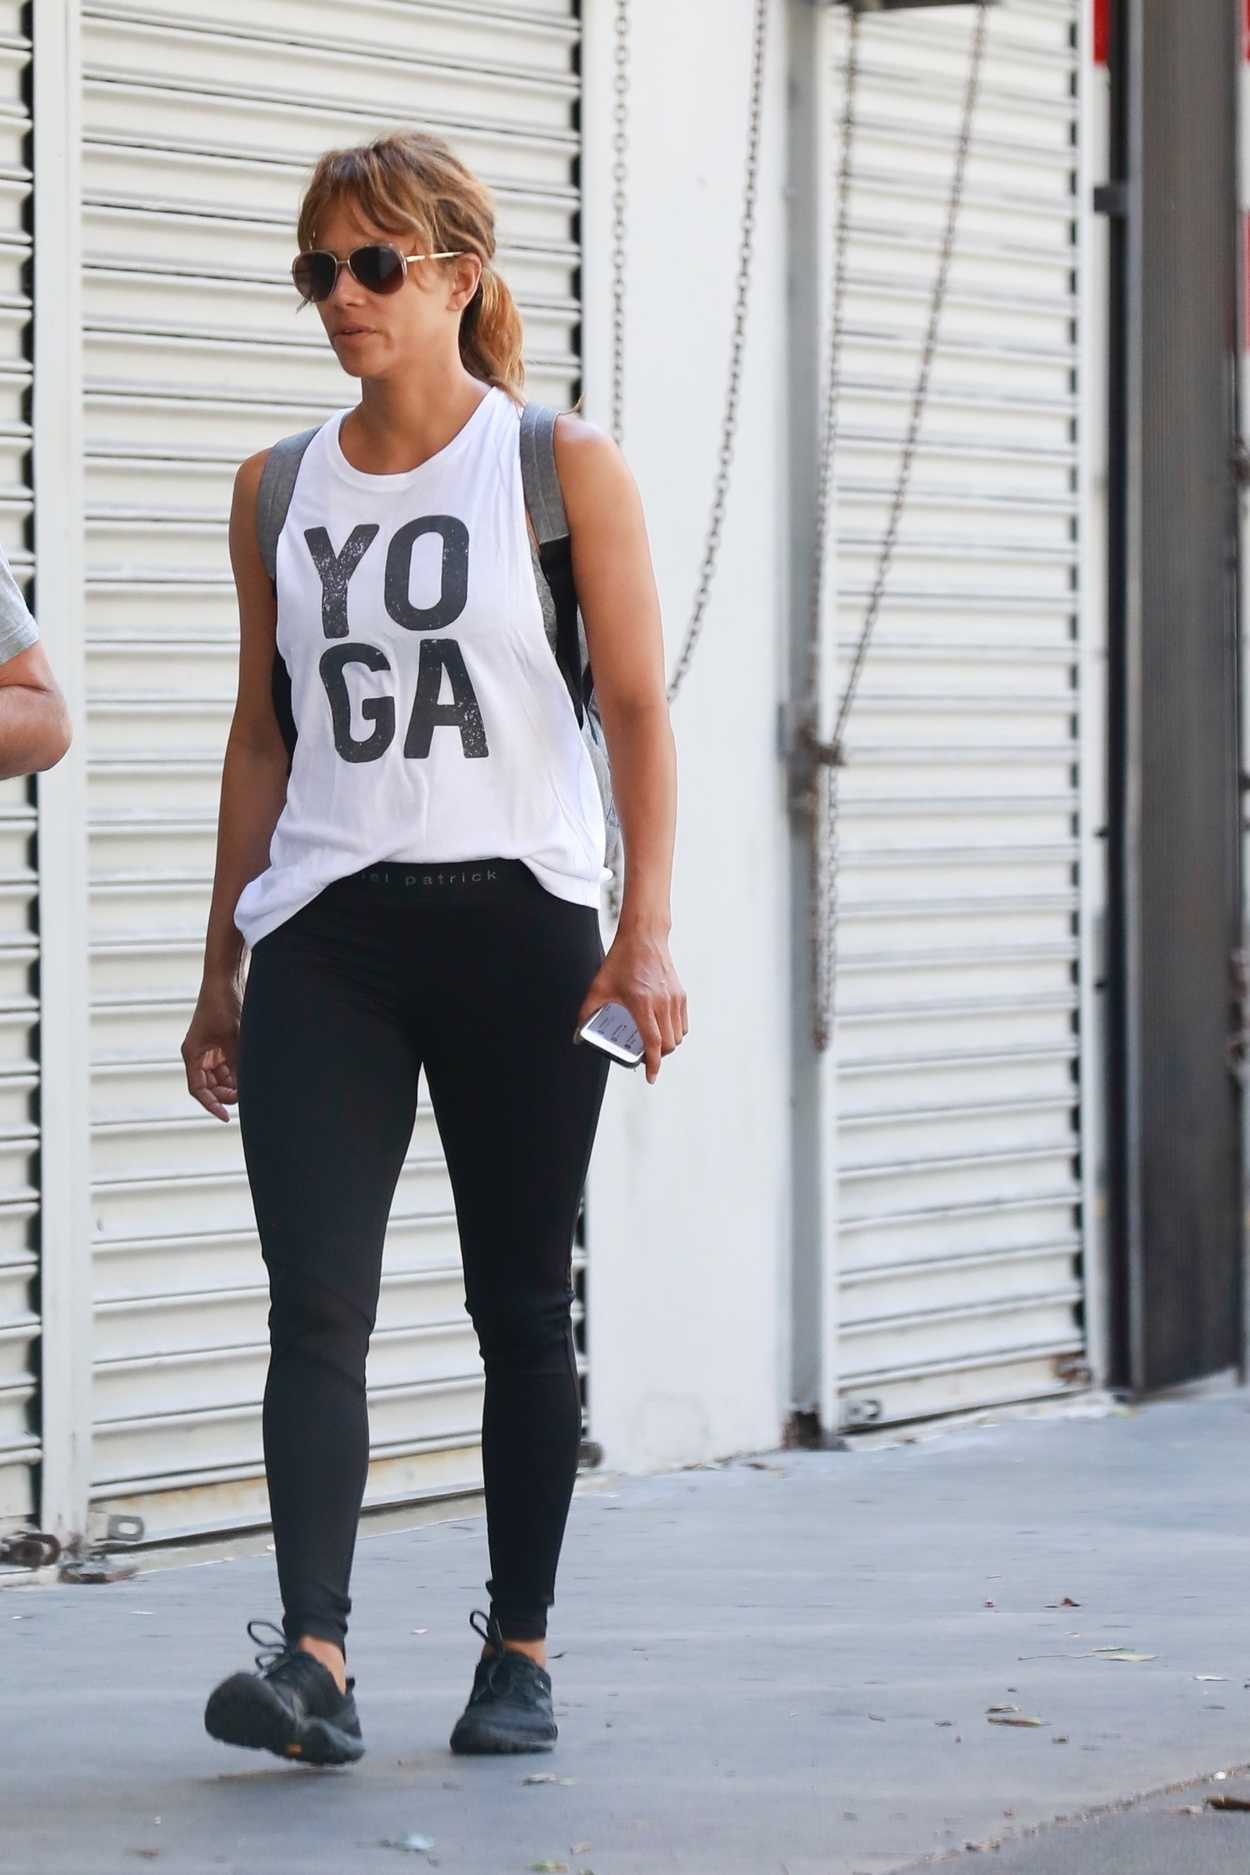 Halle Berry Was Seen in a Yoga Tank Top Out in Los Angeles 07/15/2018 ...